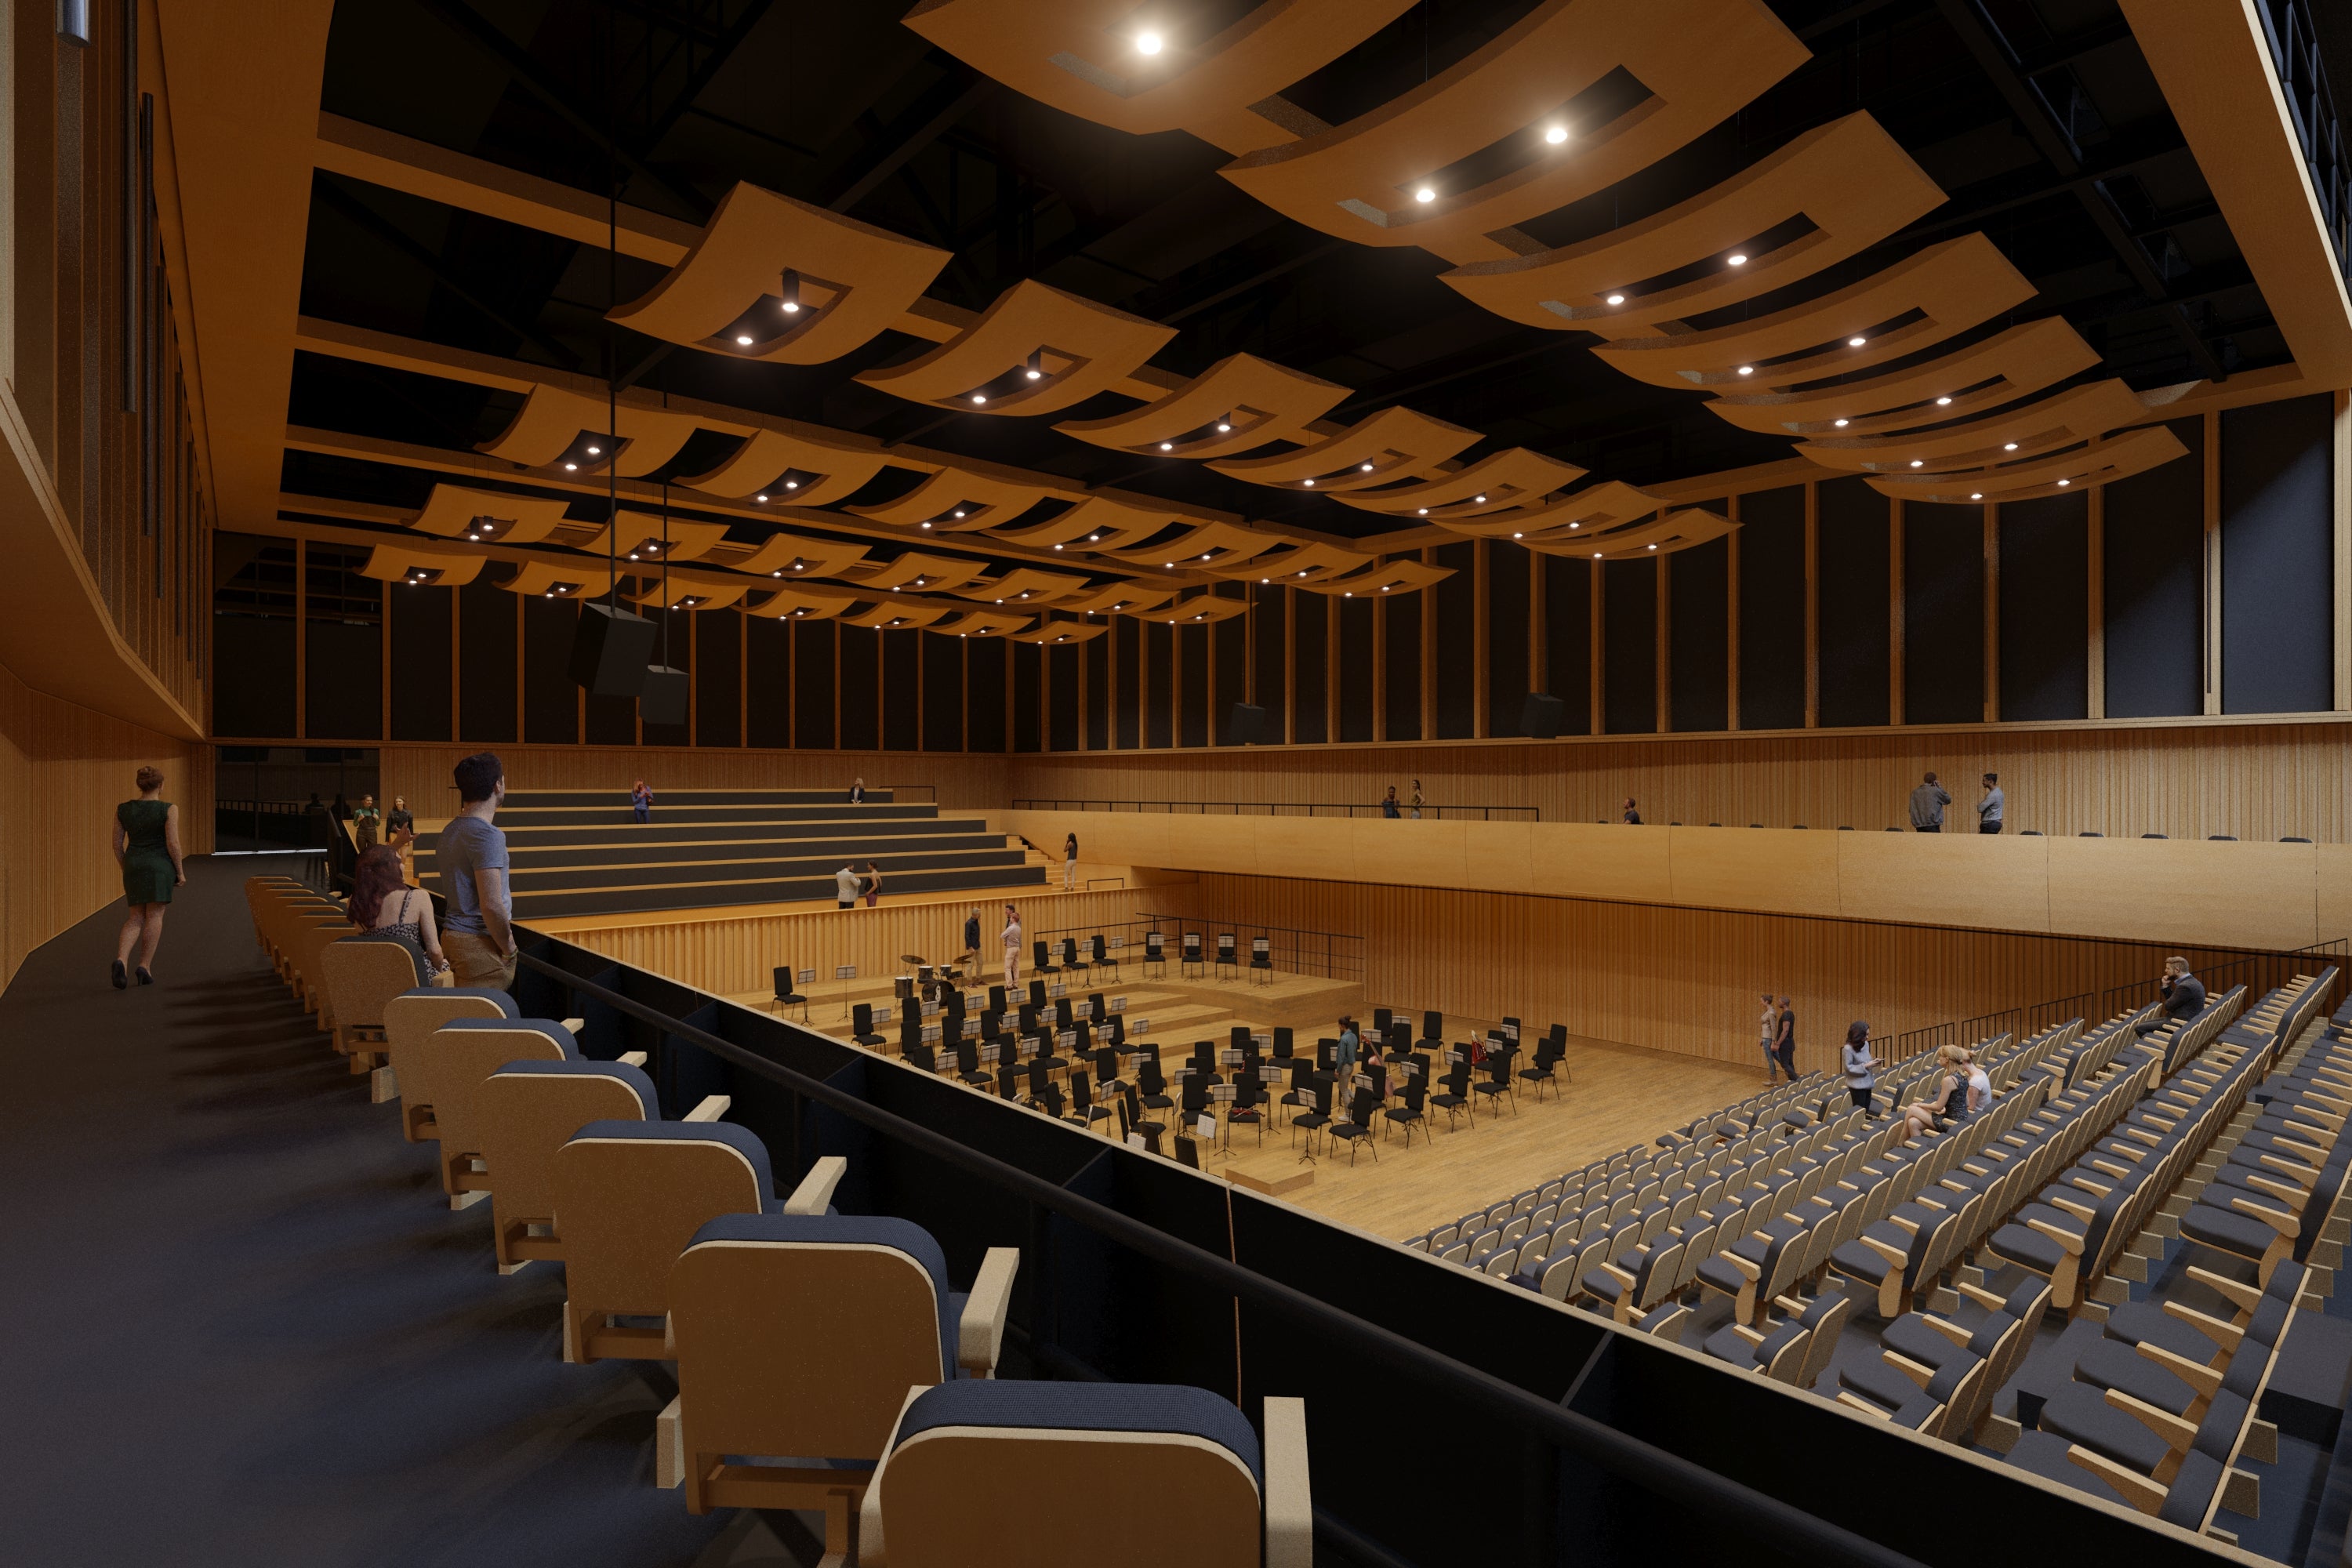 Renders of the upcoming new BBC music studios by Flanagan Lawrence (Flanagan Lawrence/BBC)